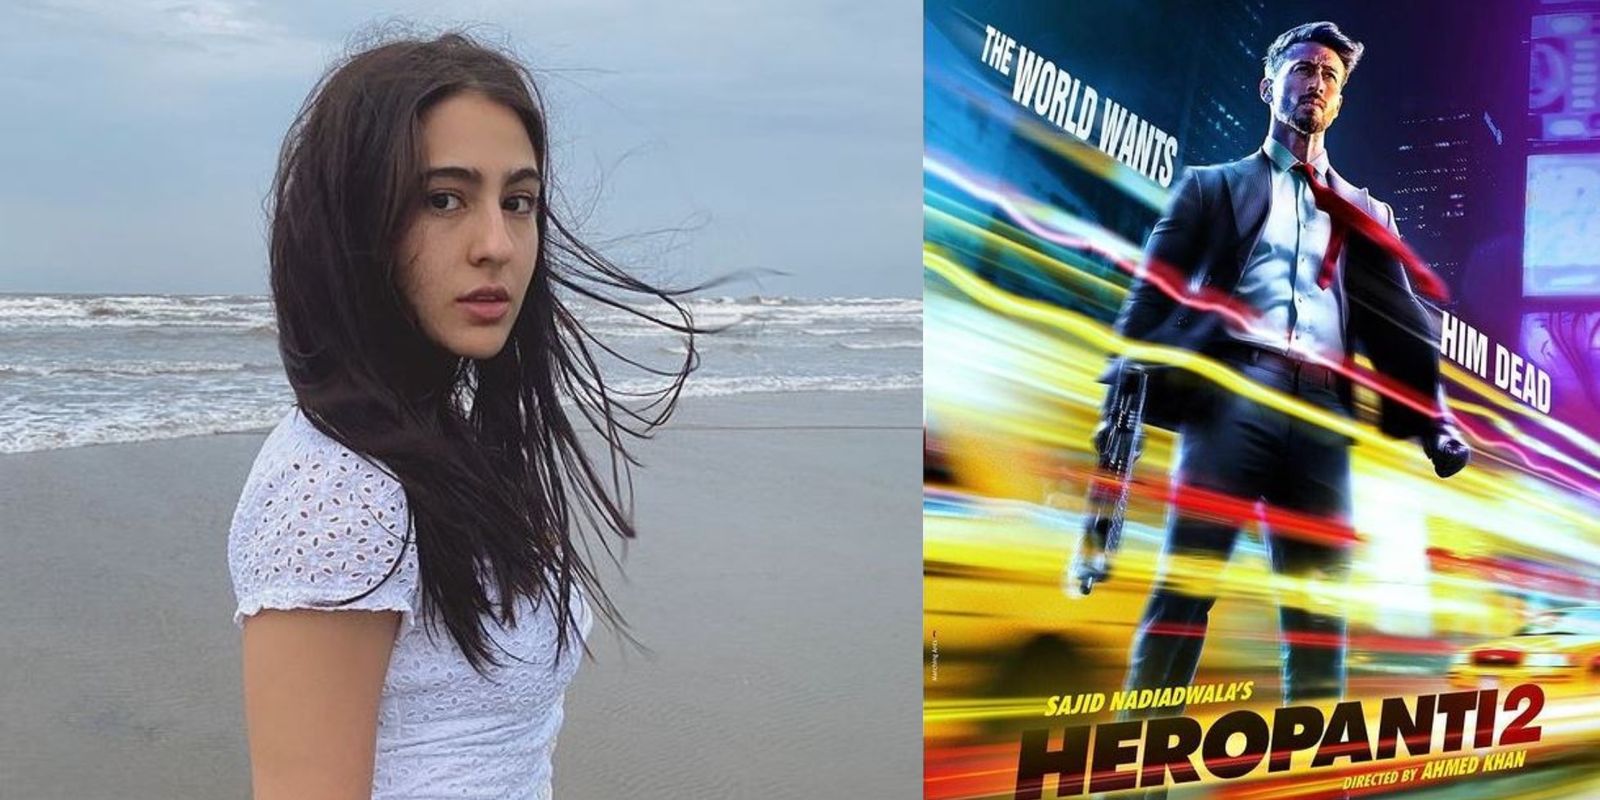 Heropanti 2: Sara Ali Khan Was The Top Contender For The Female Lead, Was Dropped For This Reason?